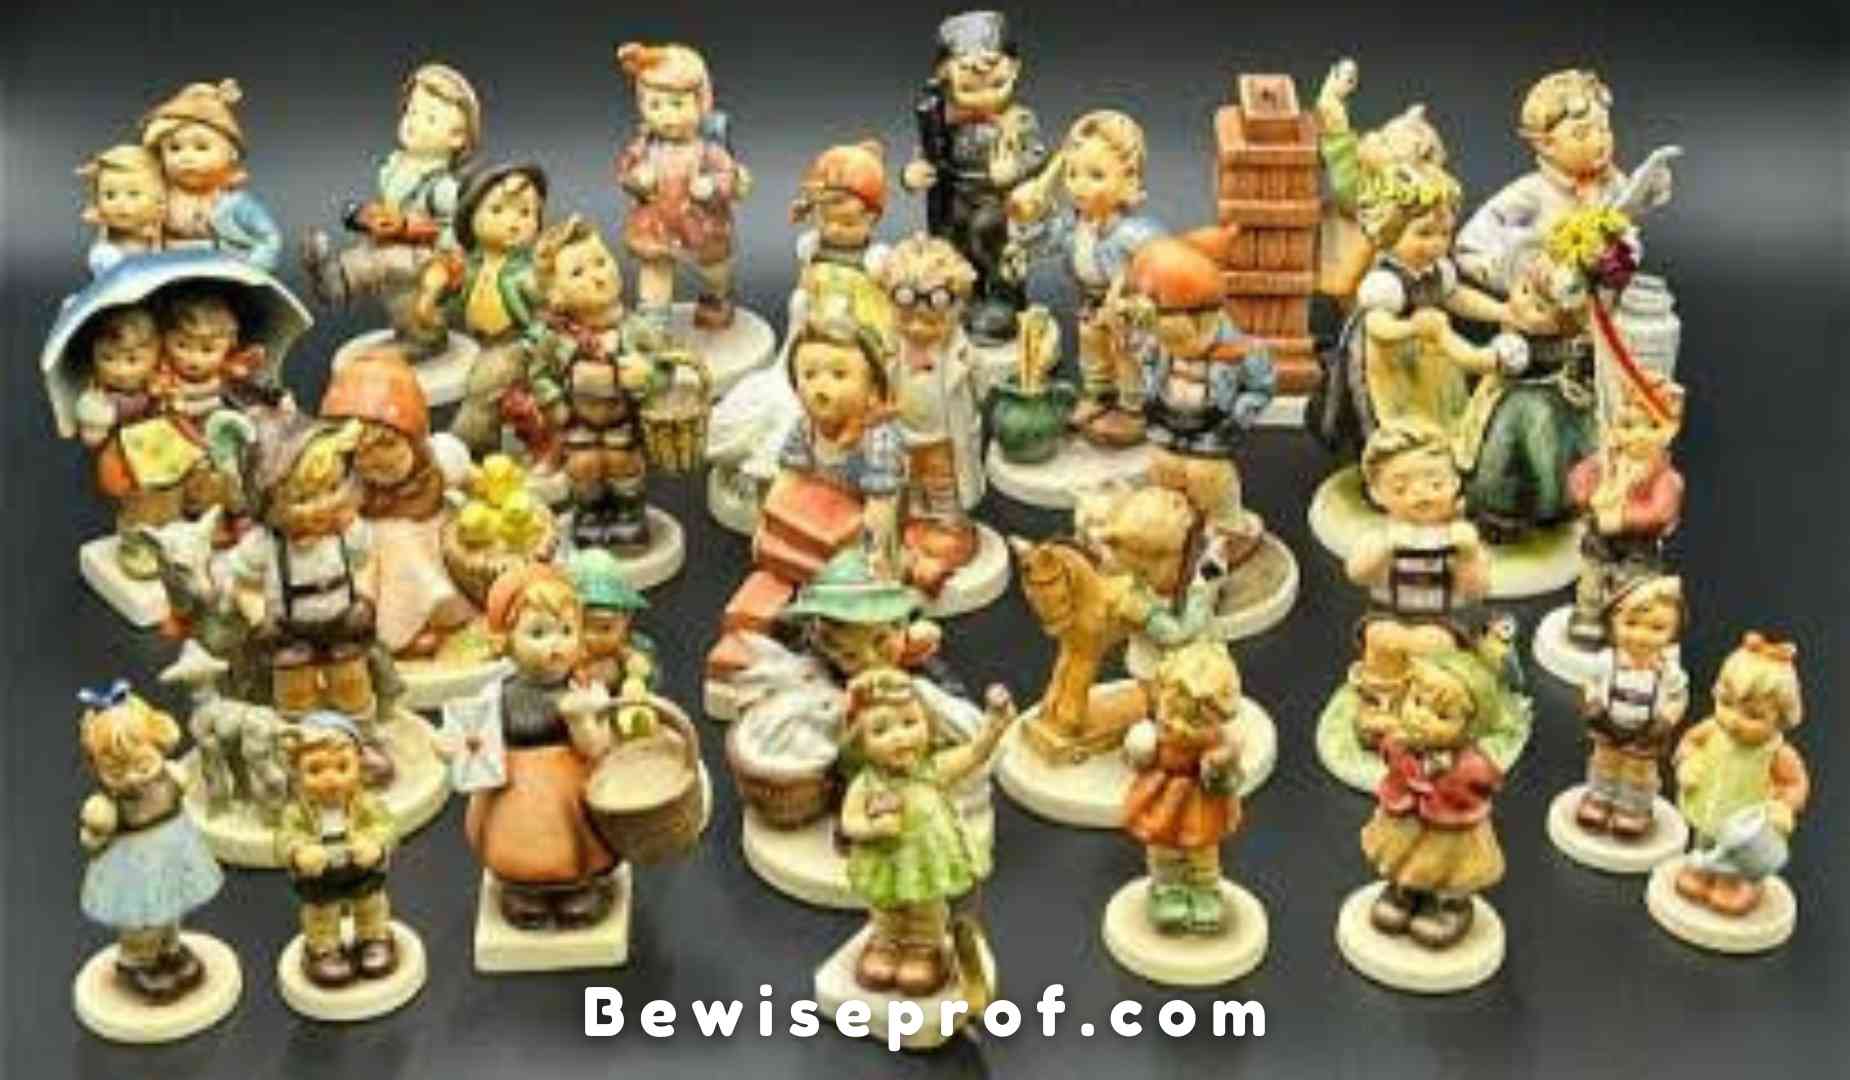 List Of Most Valuable Hummel Figurines And Where To Sell Them